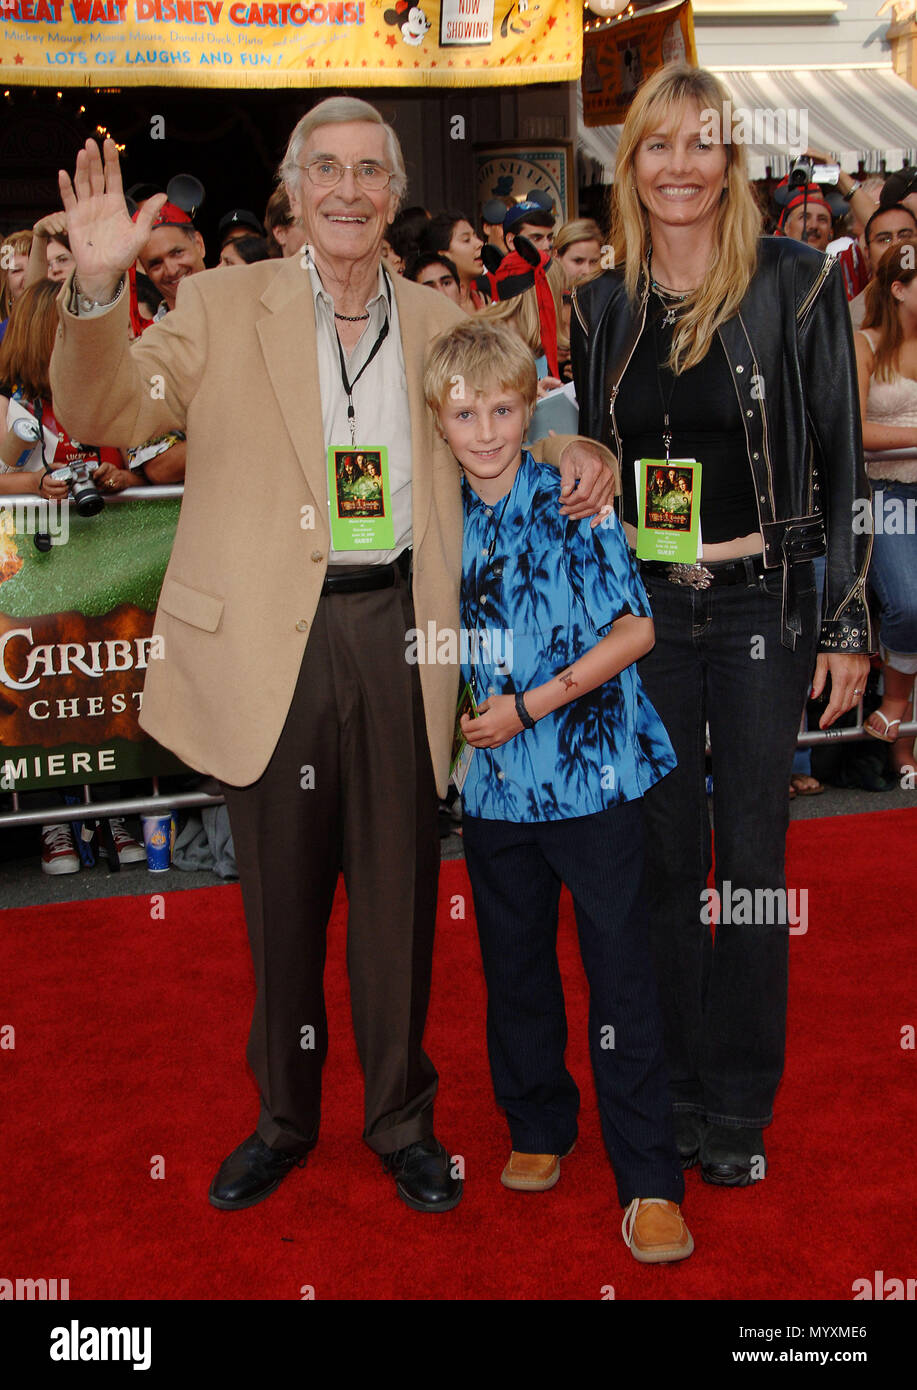 Martin Landau  arriving at the Pirates Of The Caribbean Premiere - Dead Man Chest - at Disneyland  In Los Angeles. June 24, 2006.LaudauMartin013  Event in Hollywood Life - California, Red Carpet Event, USA, Film Industry, Celebrities, Photography, Bestof, Arts Culture and Entertainment, Celebrities fashion, Best of, Hollywood Life, Event in Hollywood Life - California, Red Carpet and backstage, Music celebrities, Topix, Couple, family ( husband and wife ) and kids- Children, brothers and sisters inquiry tsuni@Gamma-USA.com, Credit Tsuni / USA, 2006 to 2009 Stock Photo